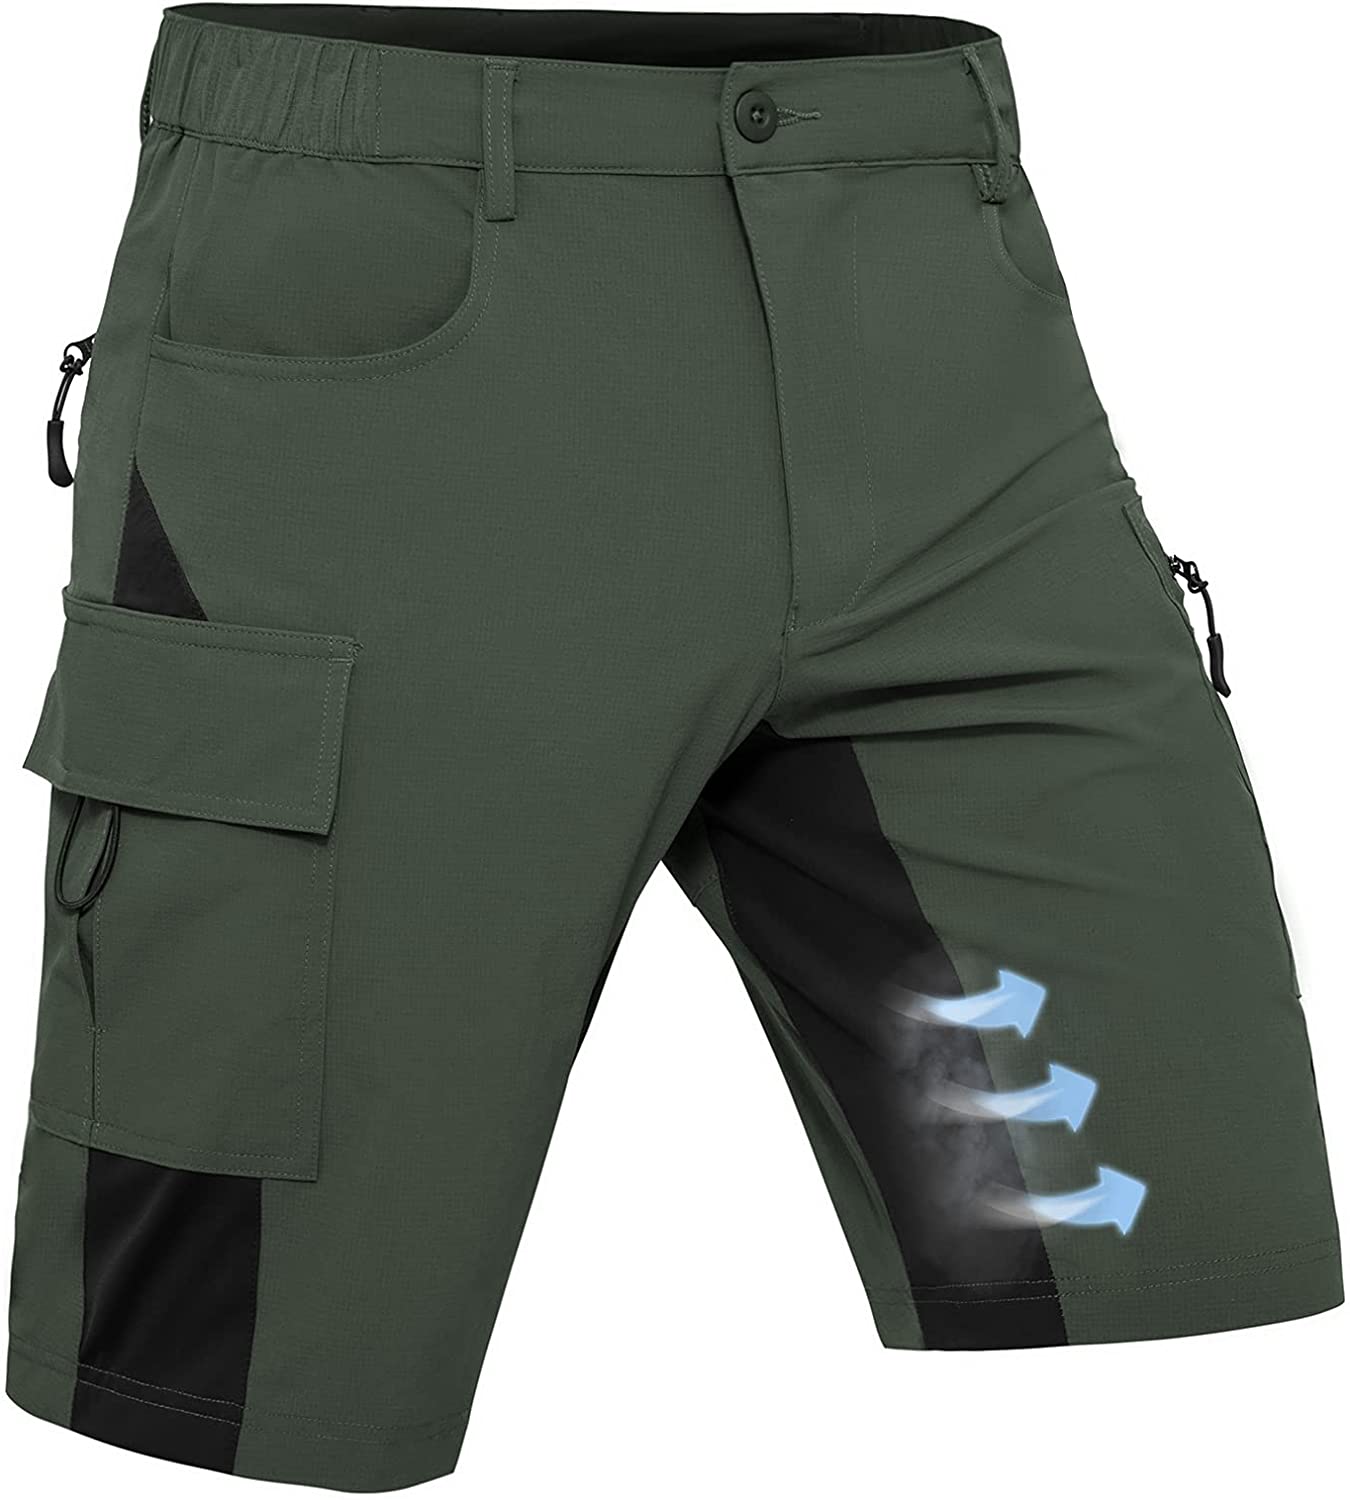 Hiauspor Men's Hiking Cargo Shorts Lightweight Quick Dry Stretch MTB Shorts for Goft Fishing Tactical Outdoor Casual Shorts Army Green / 3X-Large